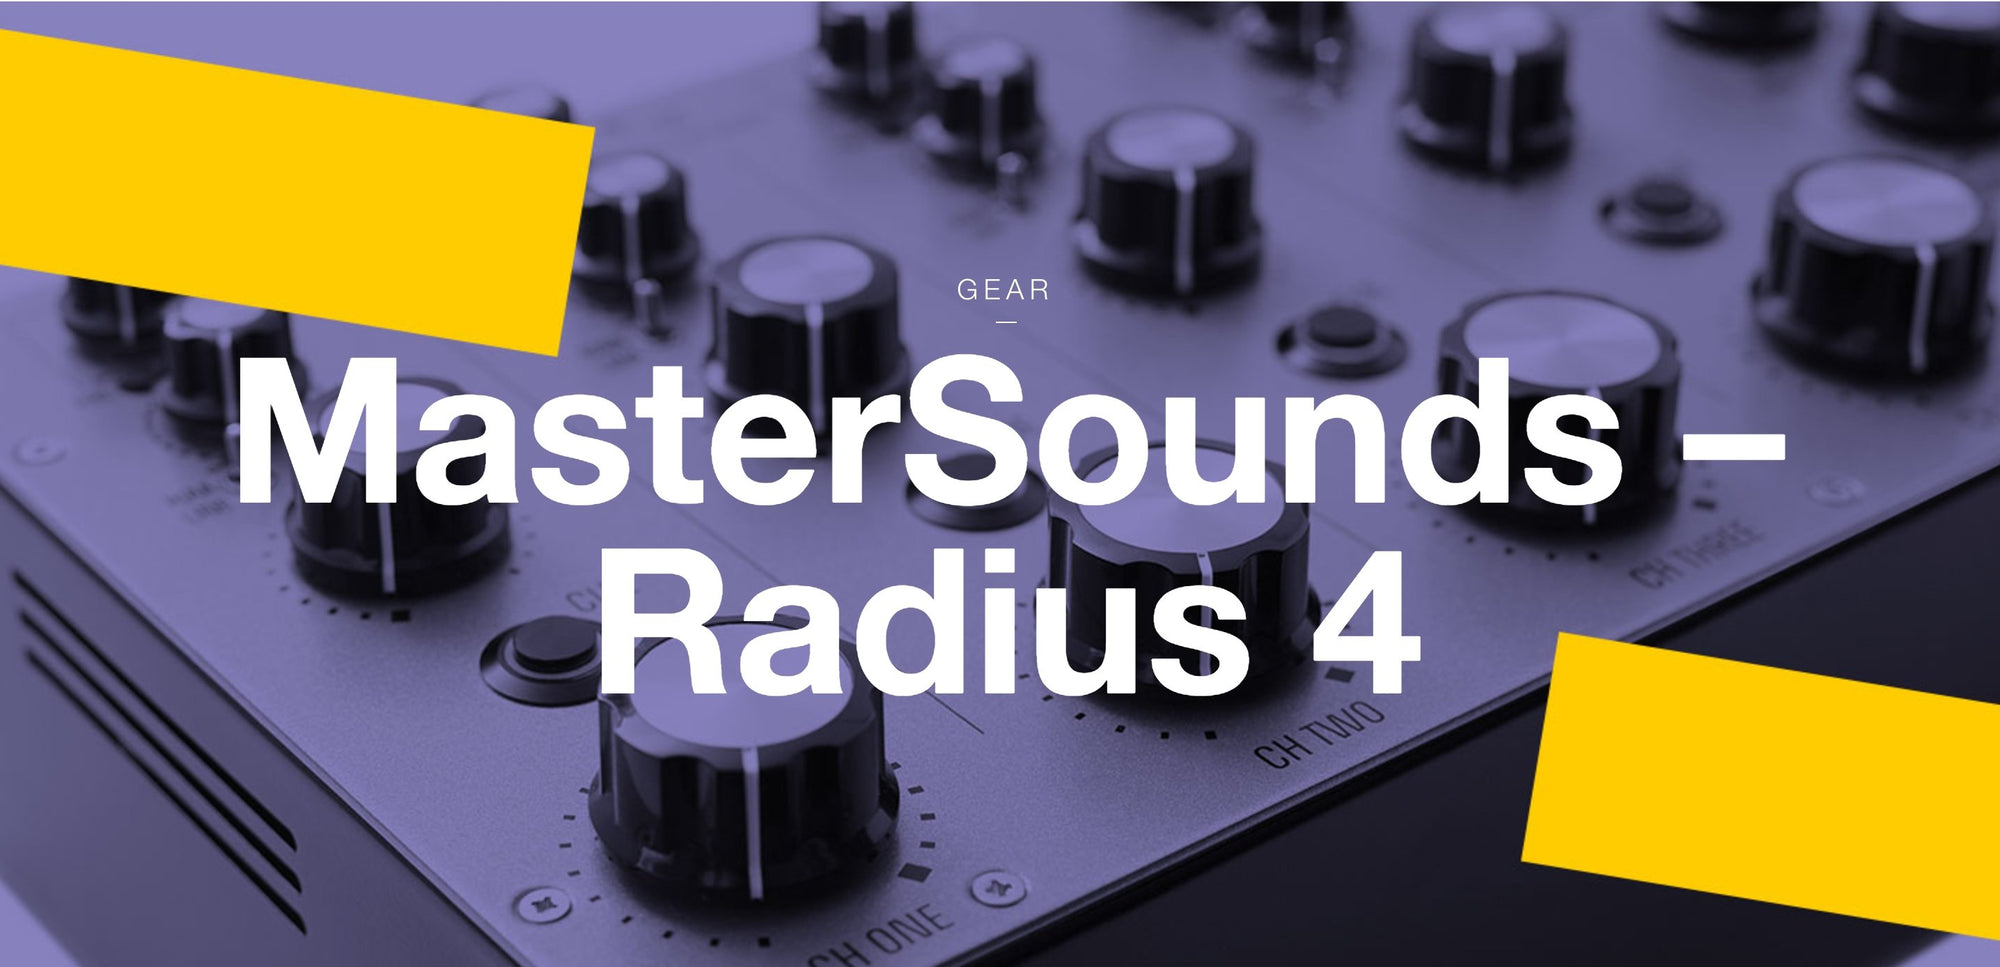 Sloth Boogie rate the Radius 4 a stunning 9.5/10 - MasterSounds